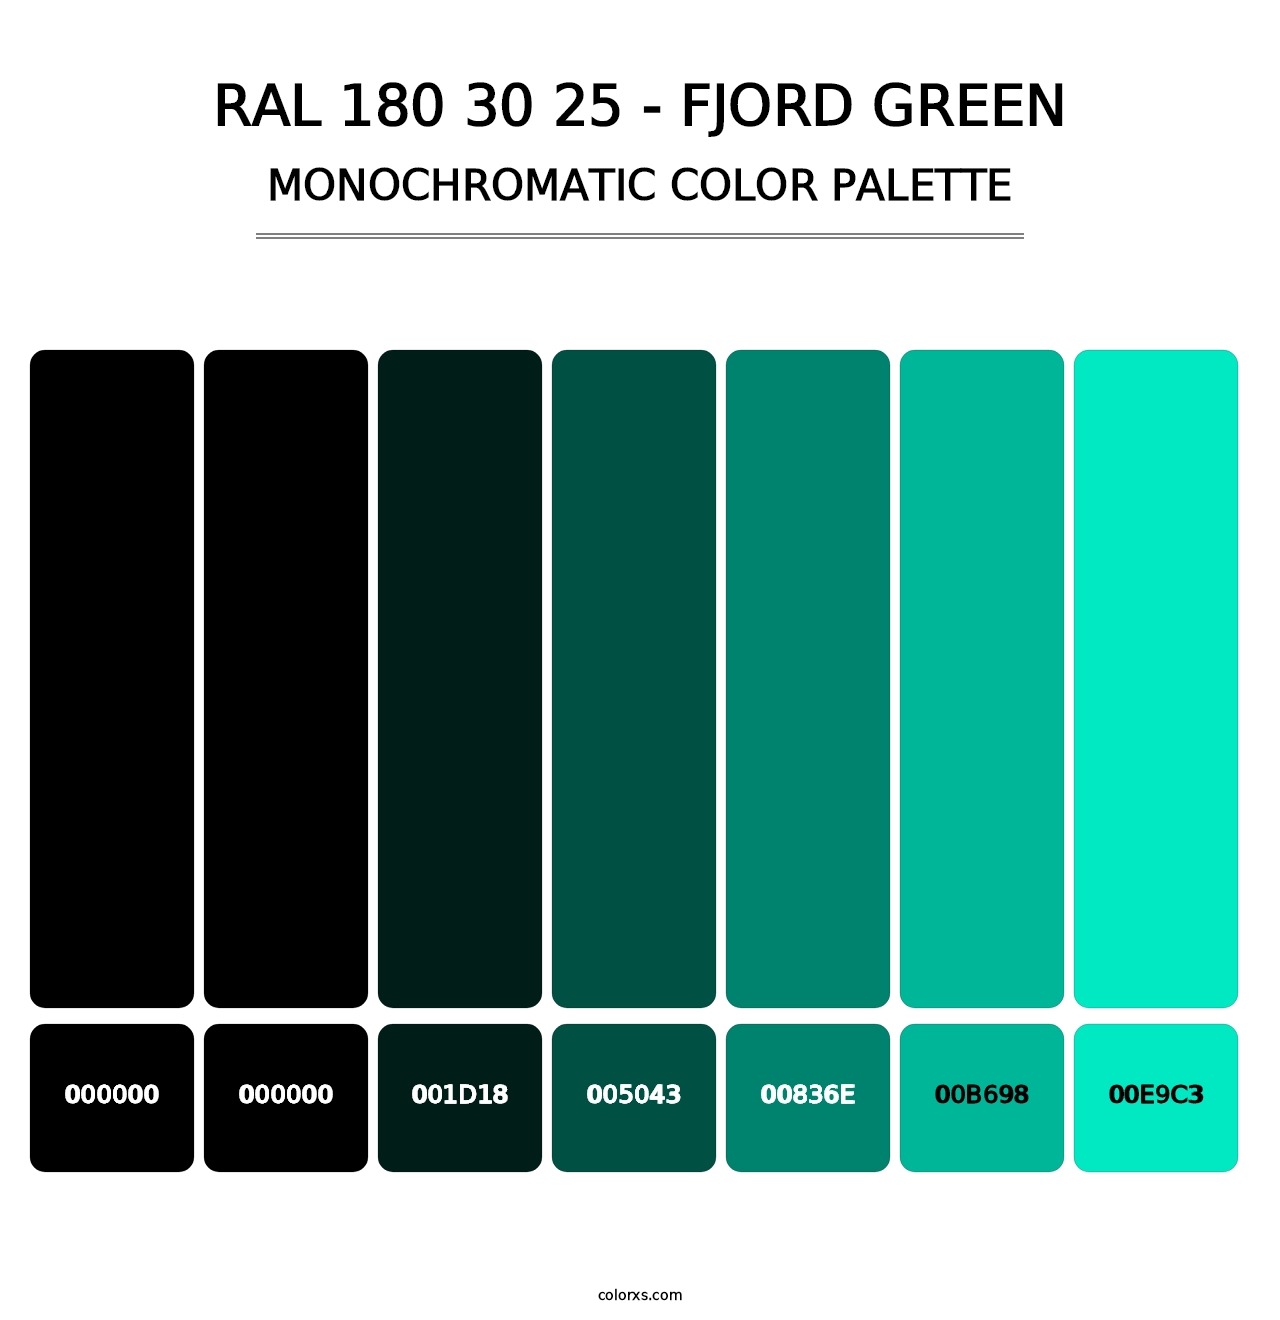 RAL 180 30 25 - Fjord Green - Monochromatic Color Palette